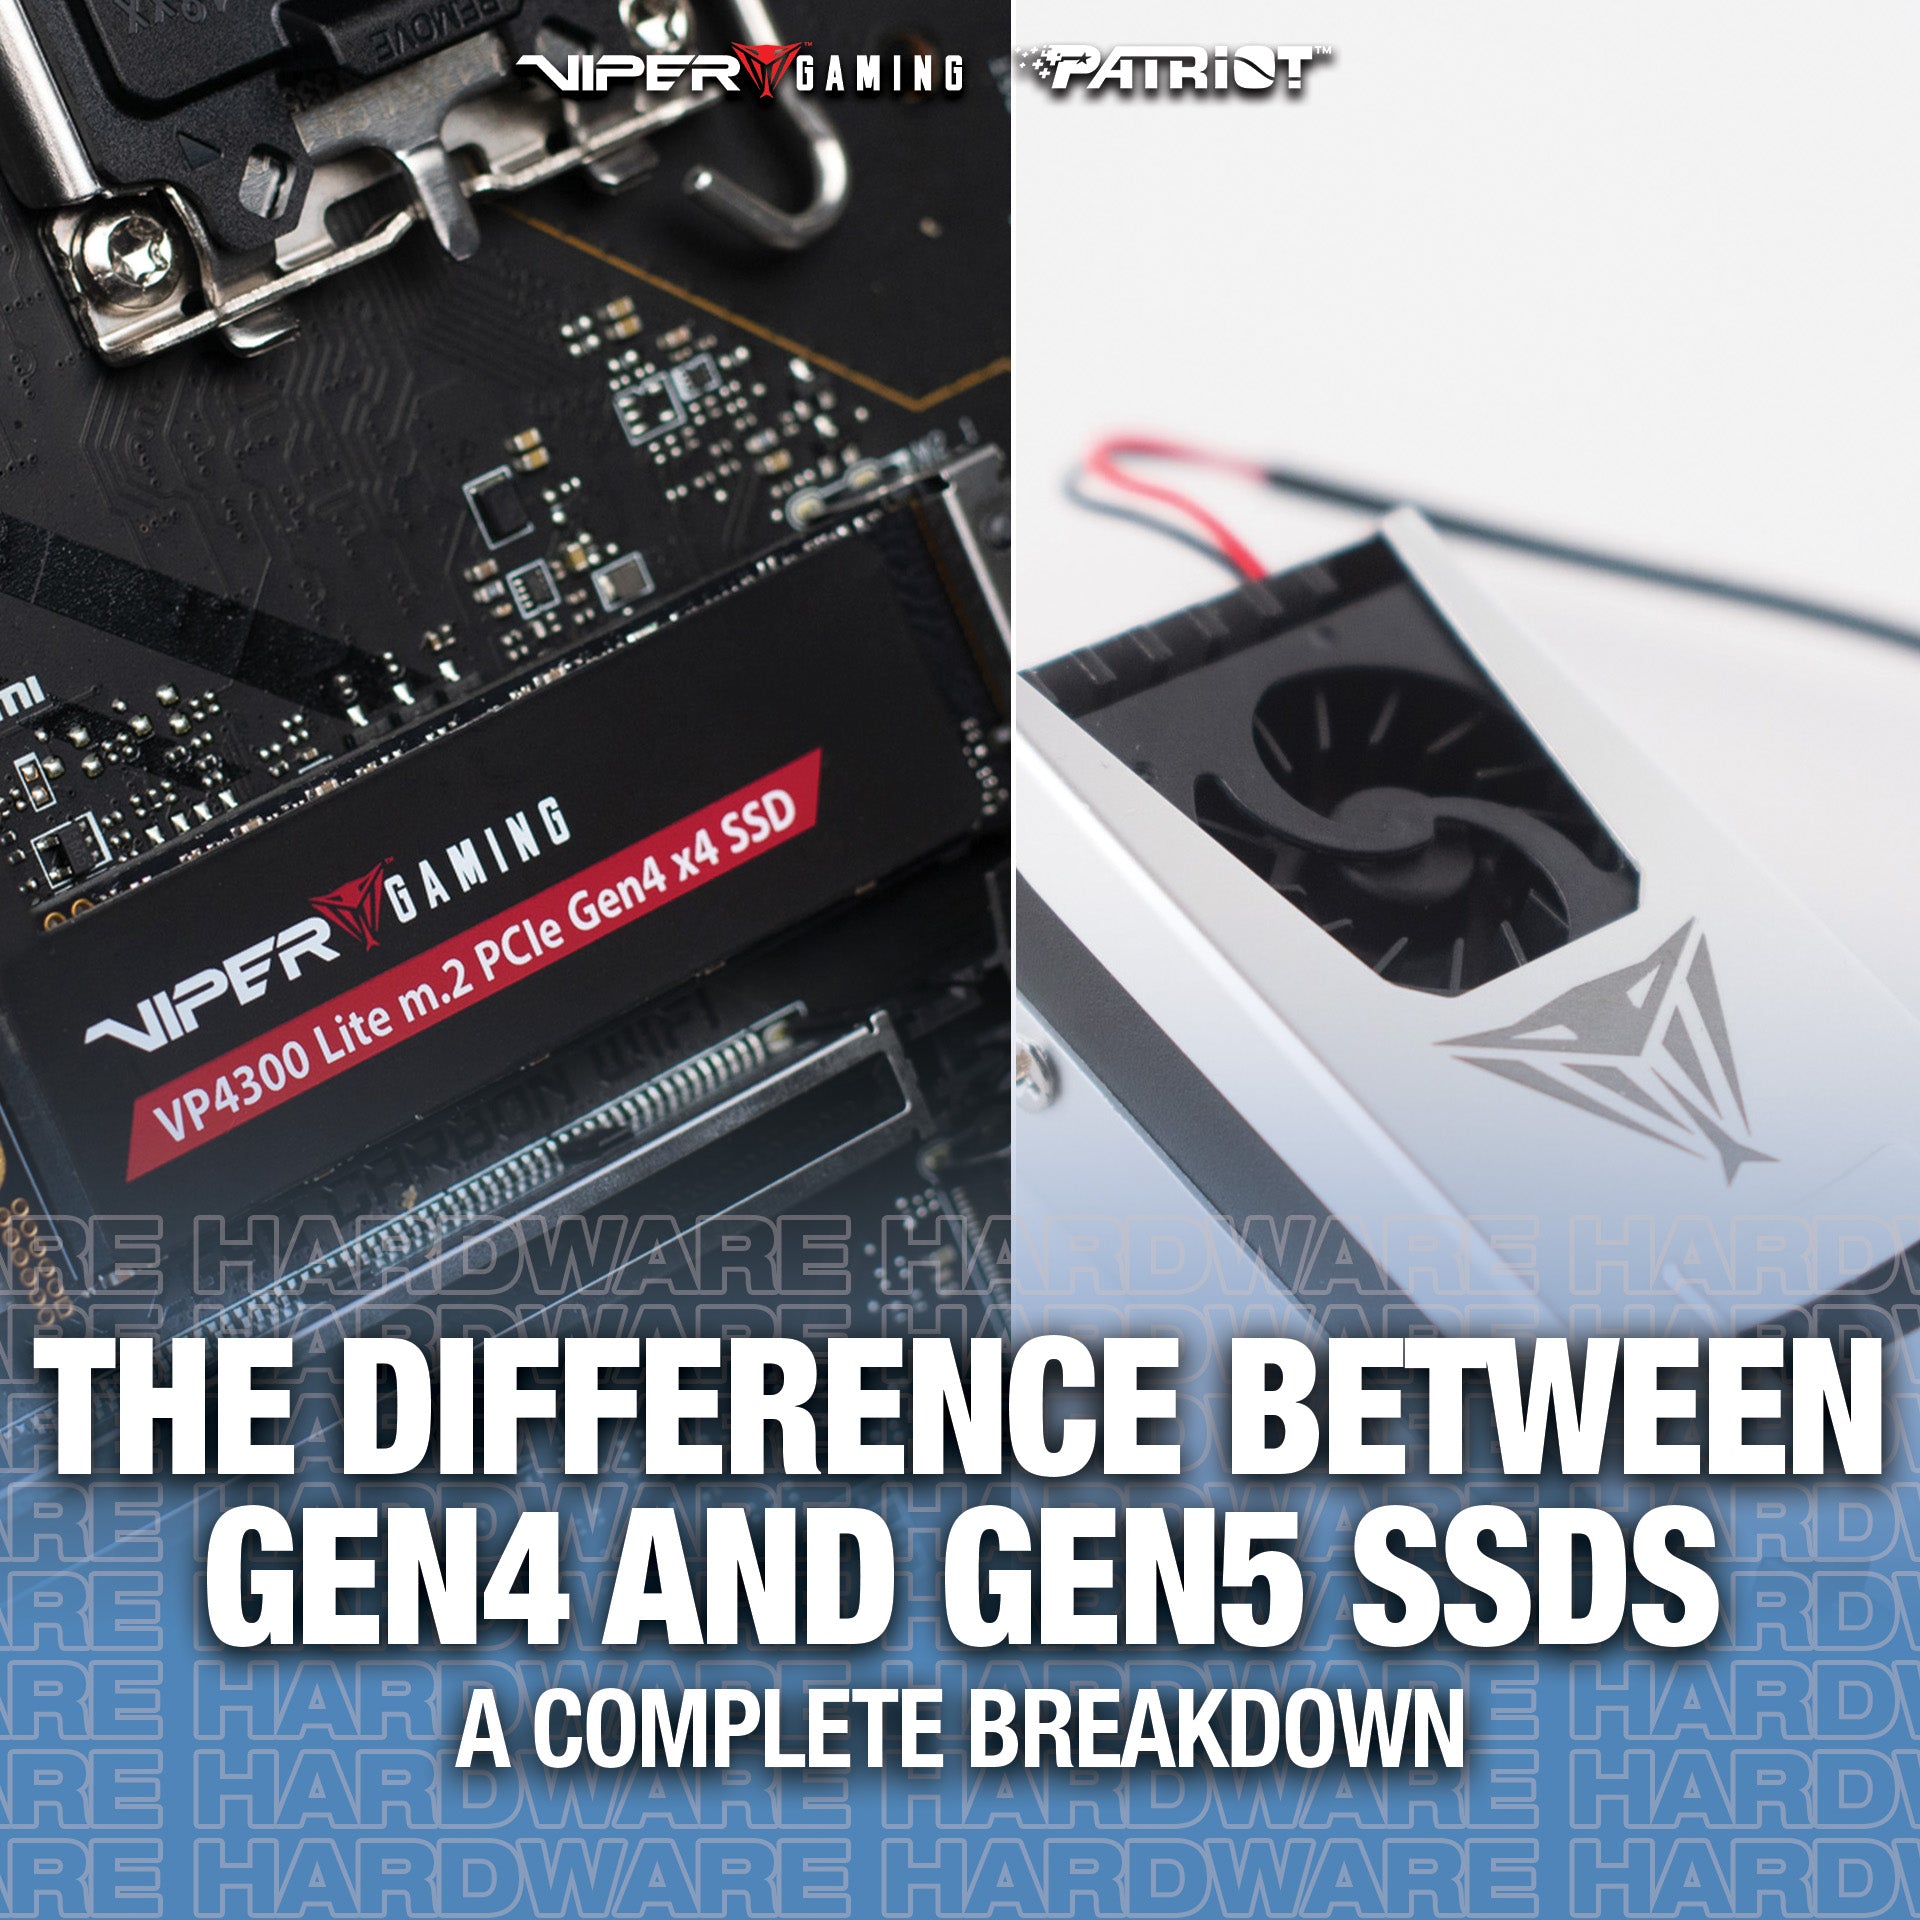 What's the Difference Between Gen4 and Gen5 SSDs?